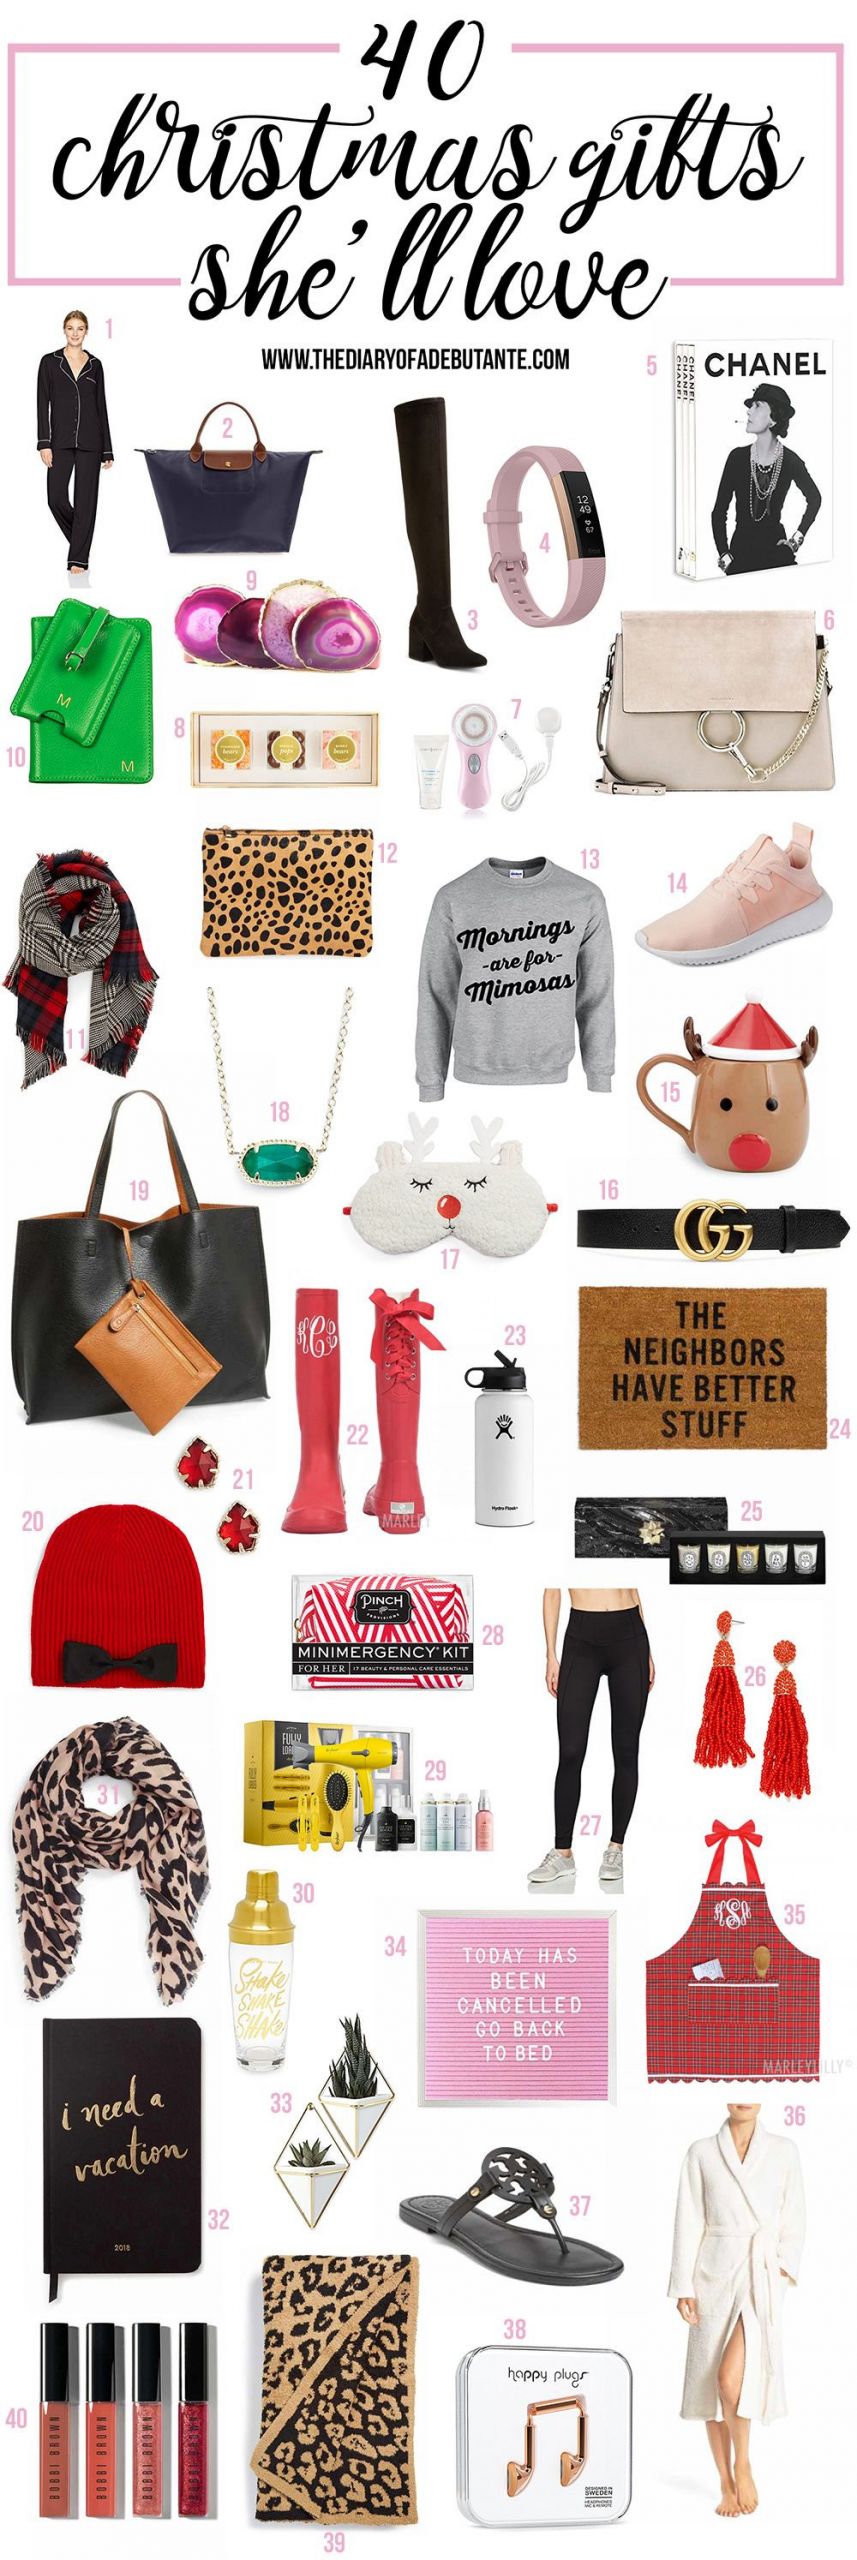 Cool Gift Ideas For Girlfriends
 Cool Gift Ideas for Girlfriend Mom or BFF this Holiday